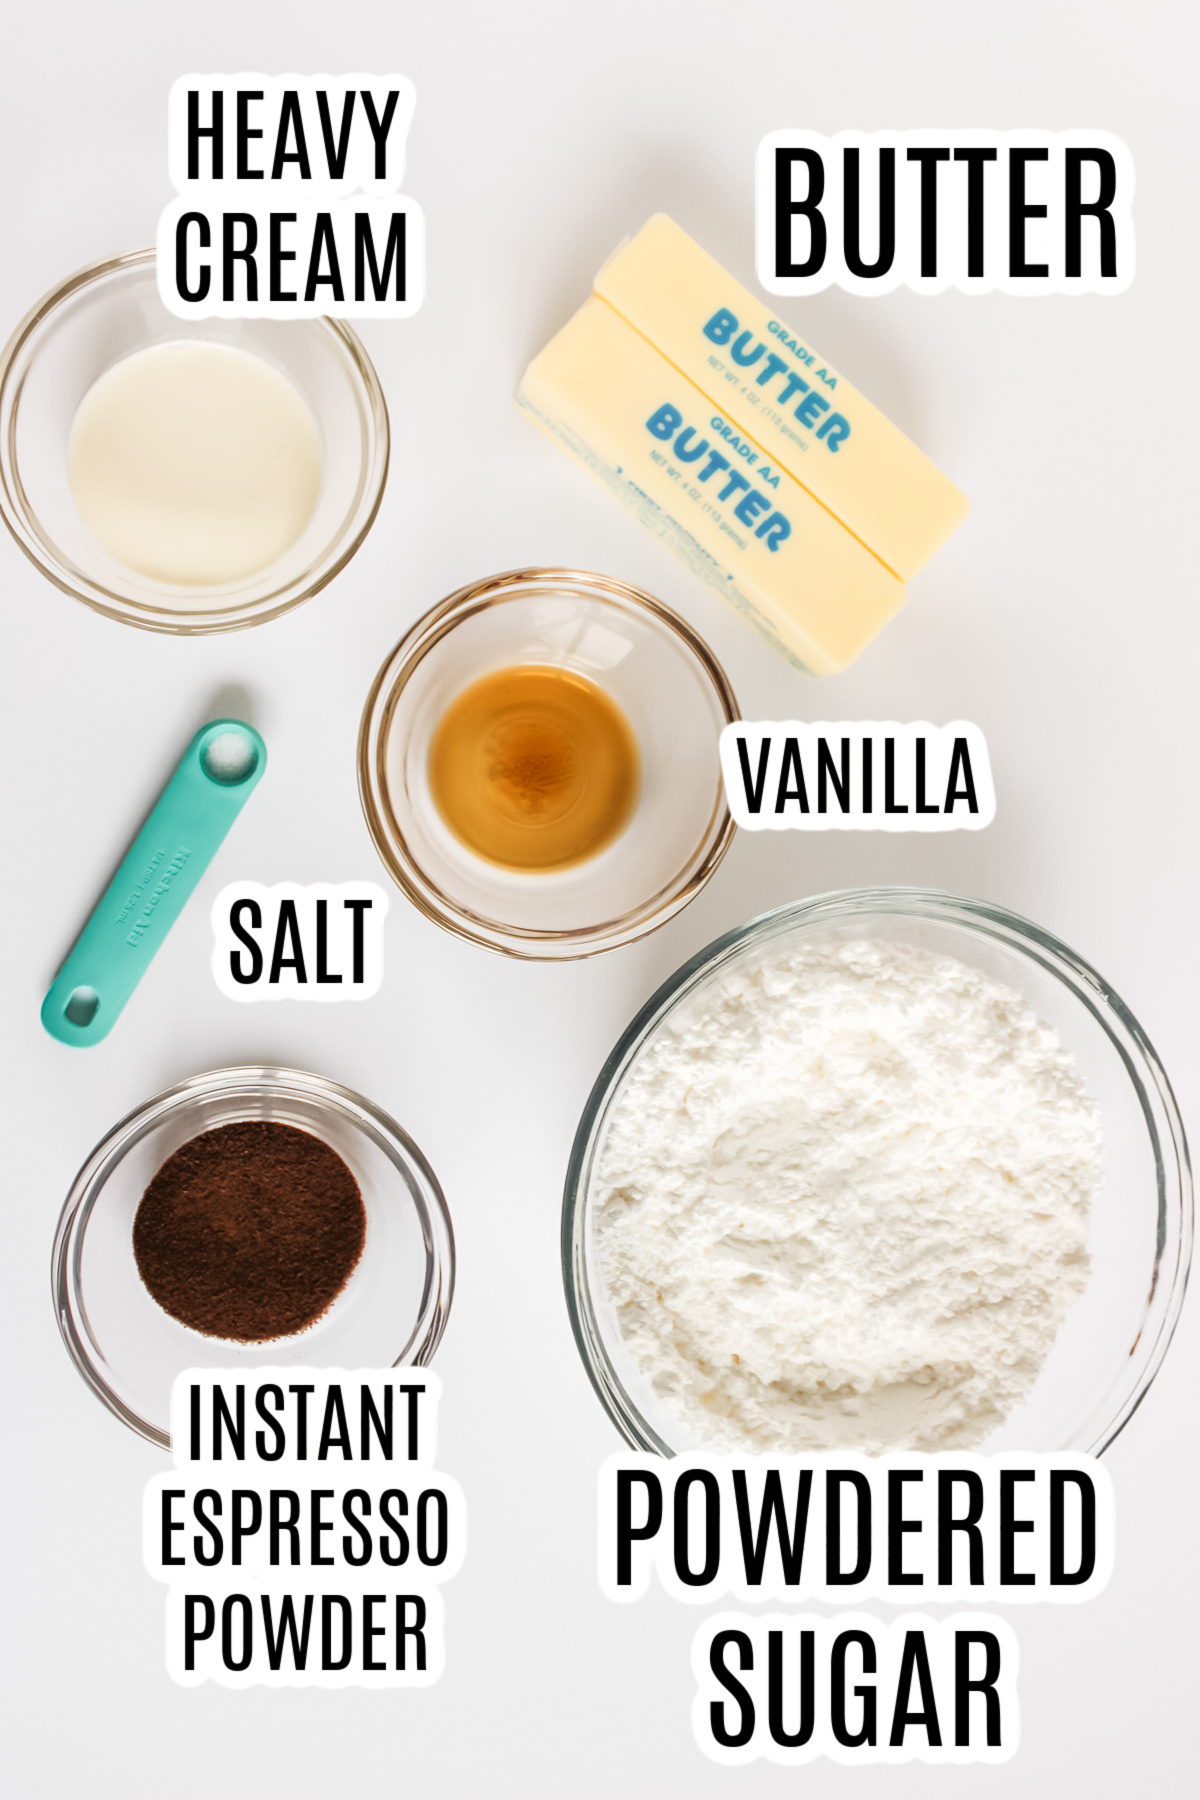 The ingredients needed to make the Coffee Buttercream Frosting include: butter, heavy cream, salt, vanilla extract, instant espresso powder and powdered sugar.